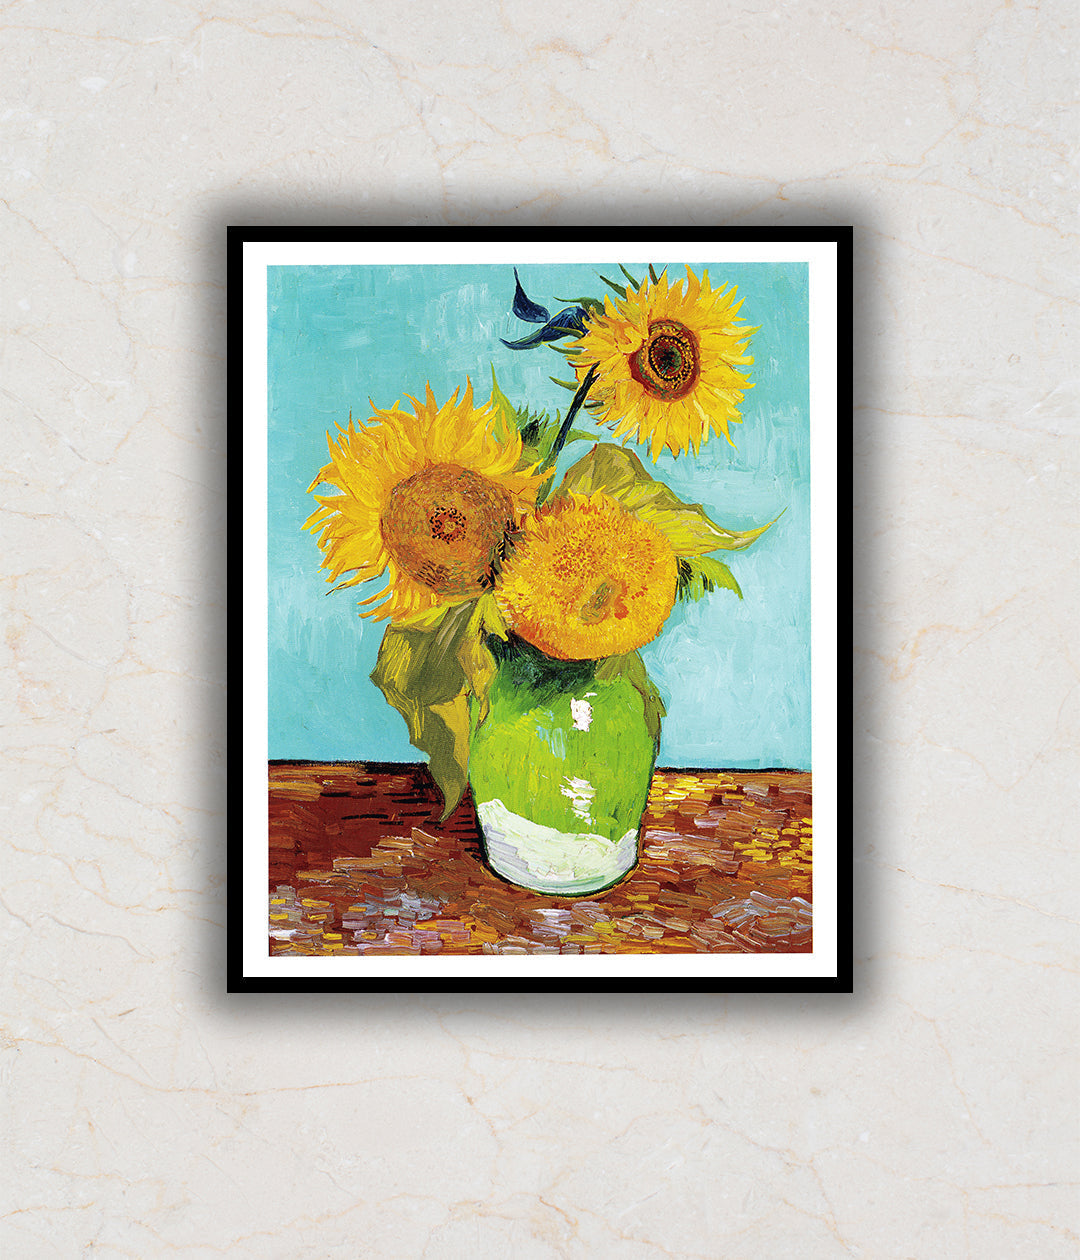 Three Sunflowers Artwork Painting For Home Wall Art D�_cor By Vincent Van Gogh